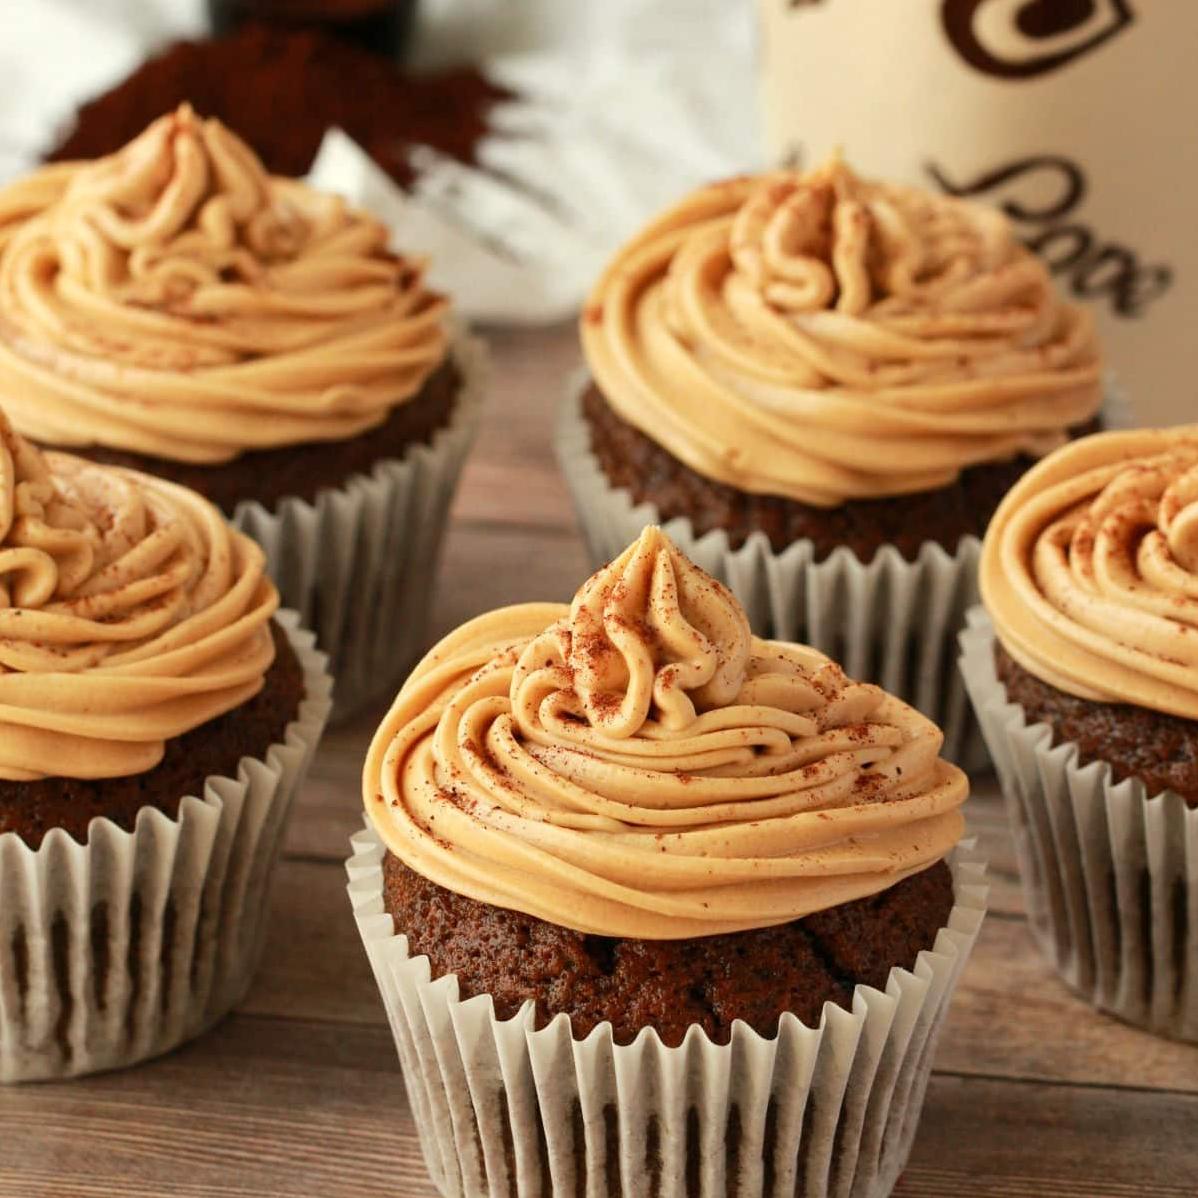  Whip up this indulgent frosting for your favorite vegan cupcakes!